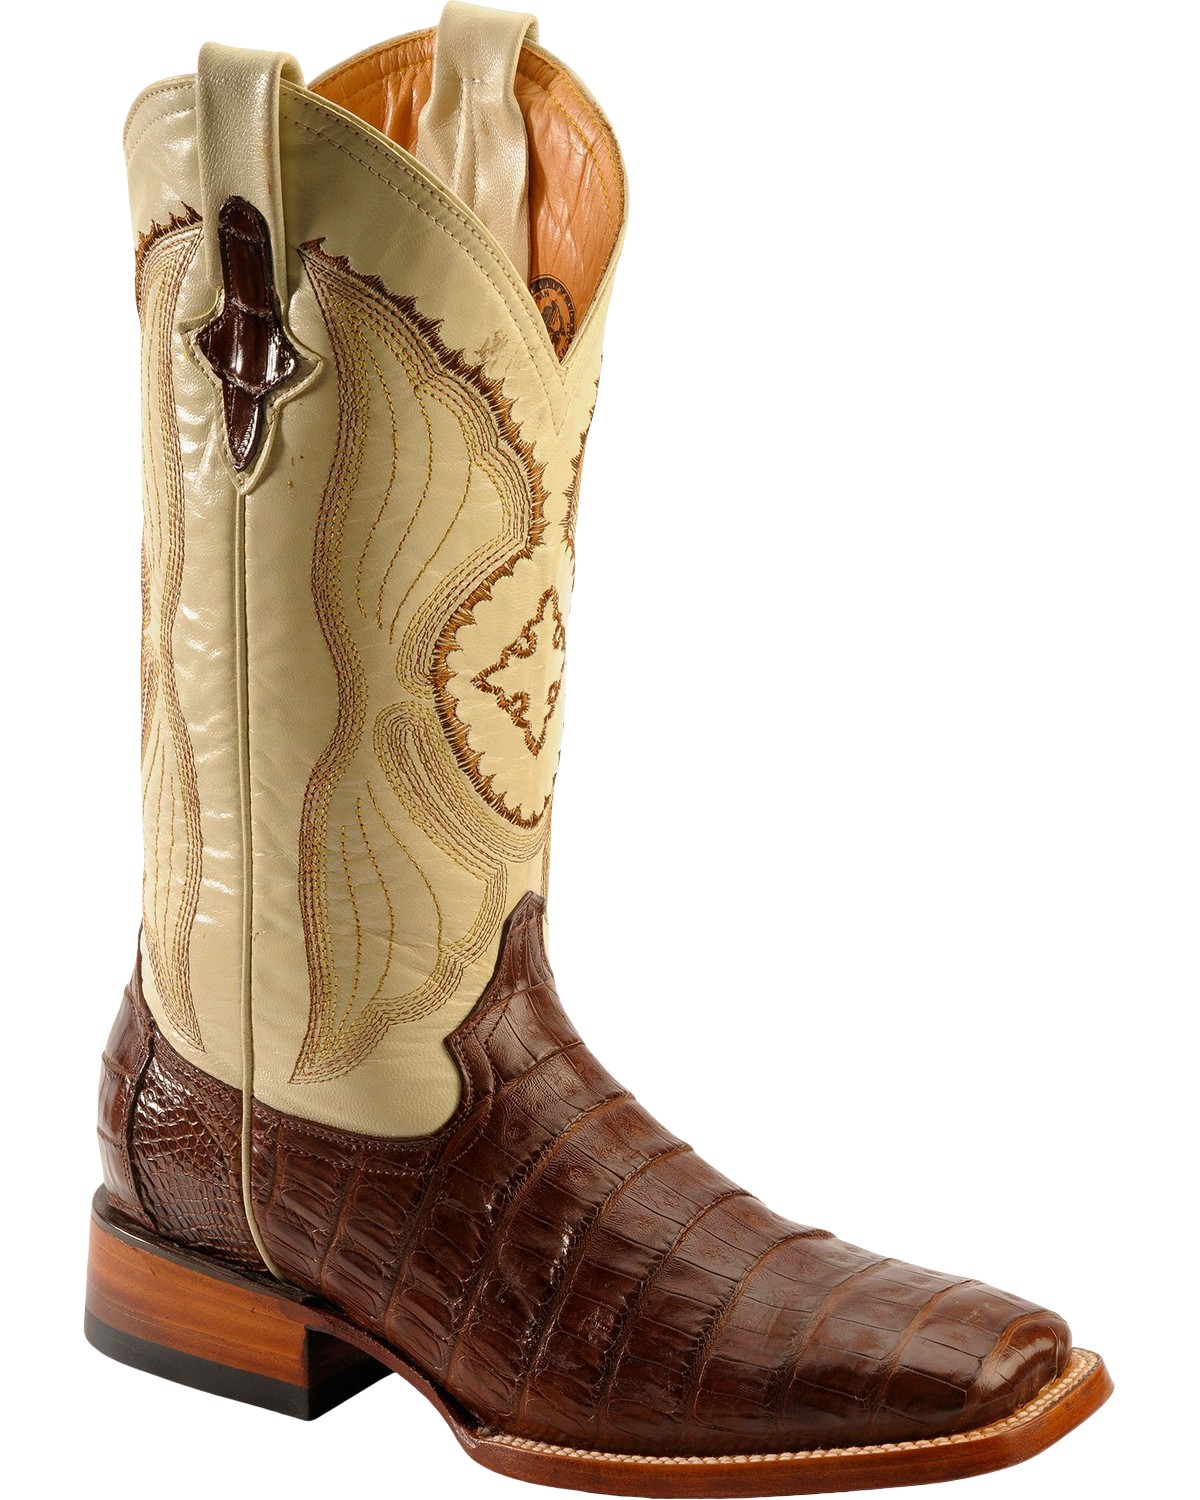 Ferrini  Mens Belly Caiman Chocolate Square Toe   Western Cowboy Boots   Mid Calf - image 1 of 7